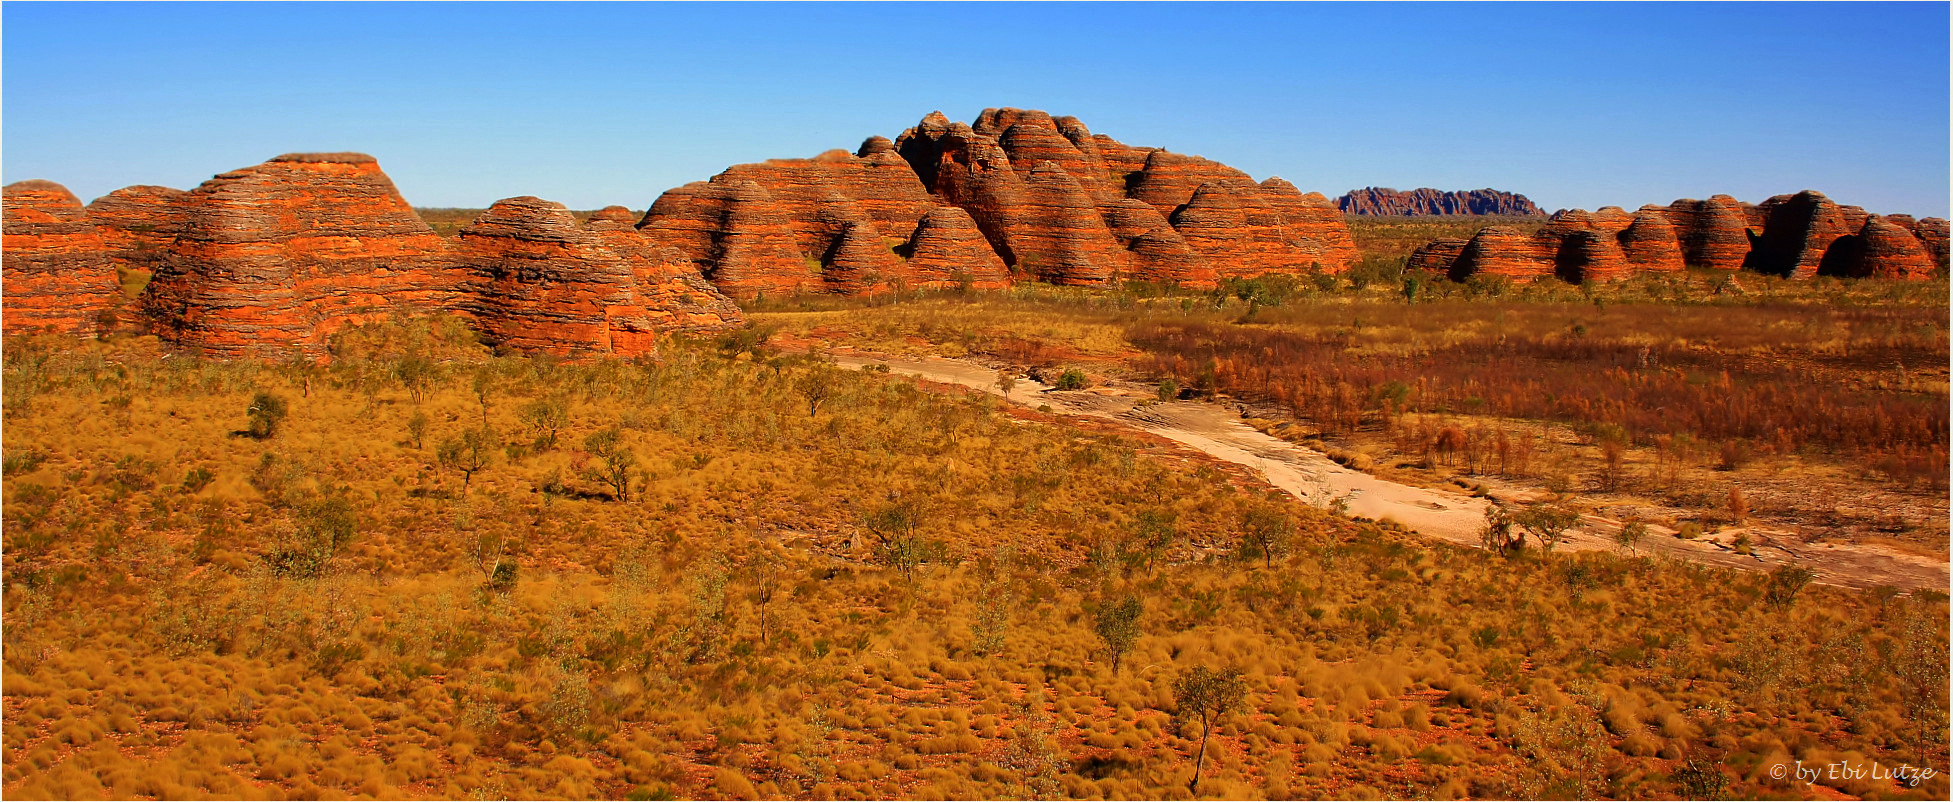 * The Beehives Domes of the Bungle Bungle NP * Piccaninny River